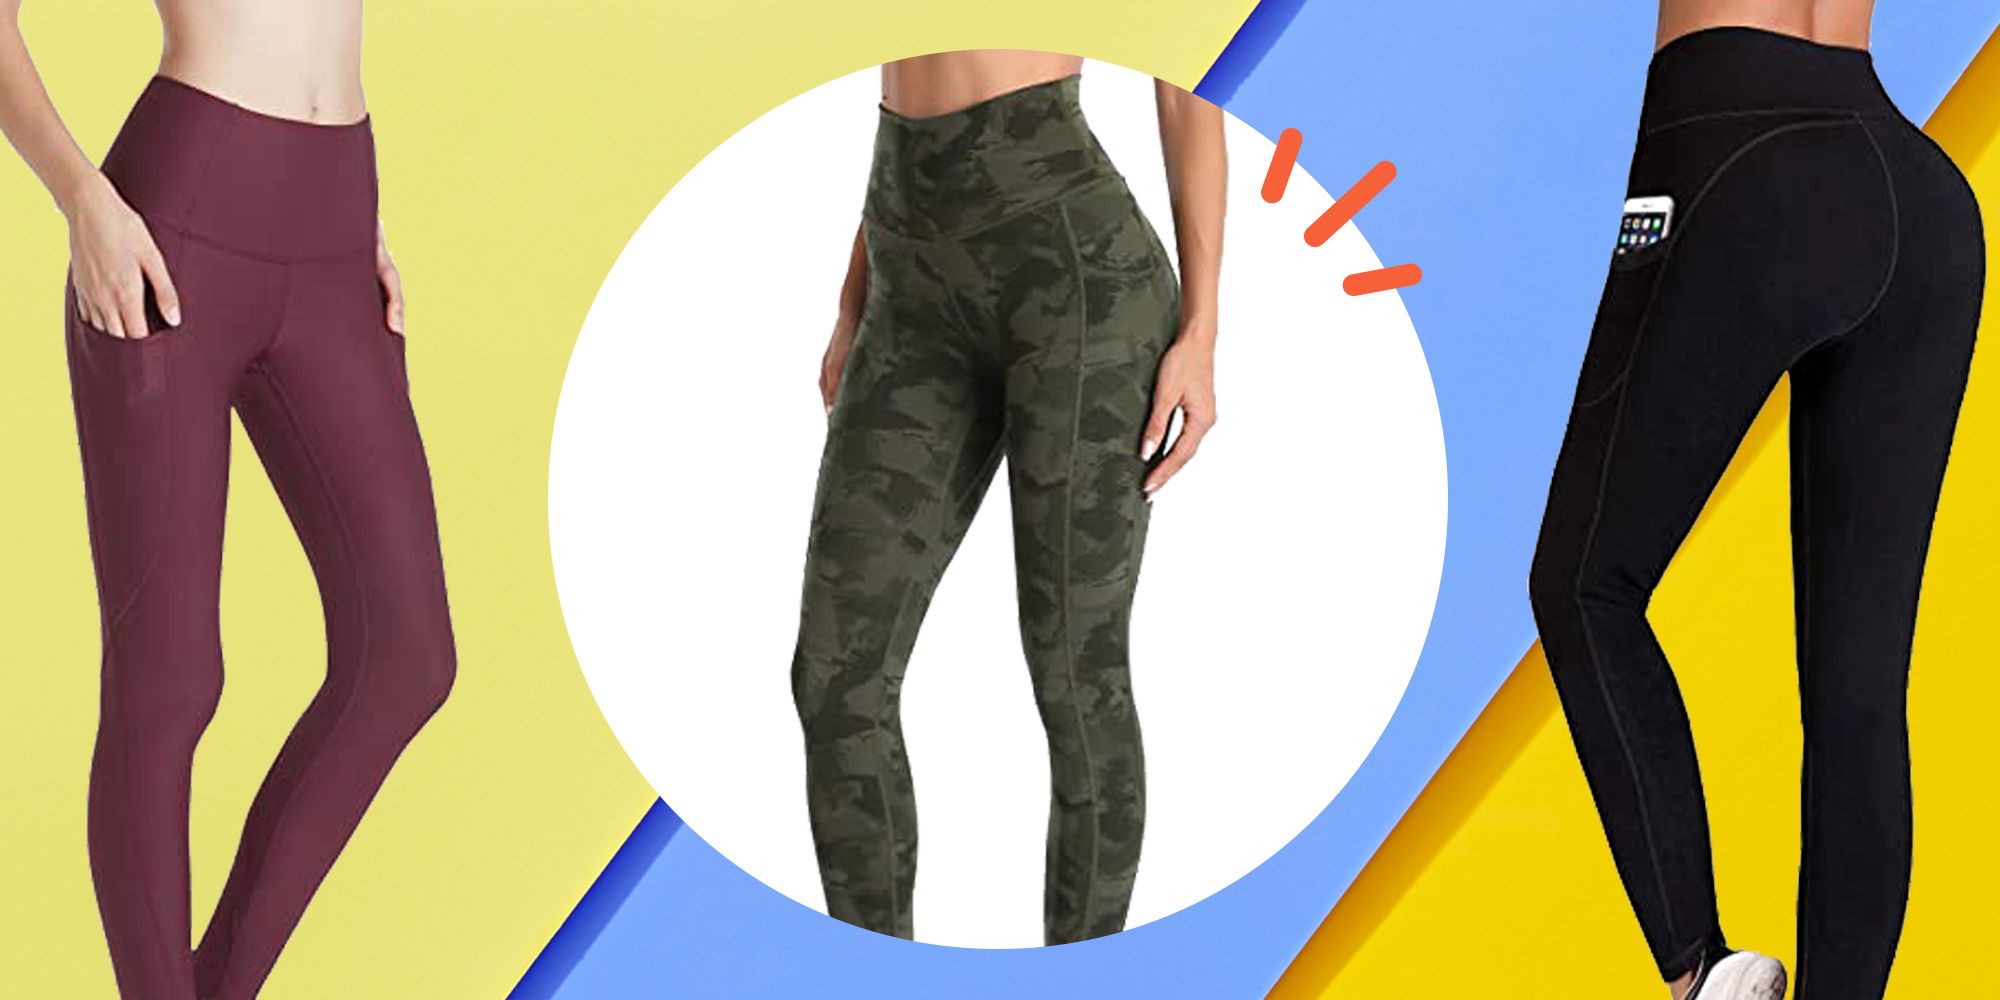 Tummy Control Workout Gym Running Tights High Waisted Leggings for Women Regular Trideer Mesh Yoga Pants with Pockets